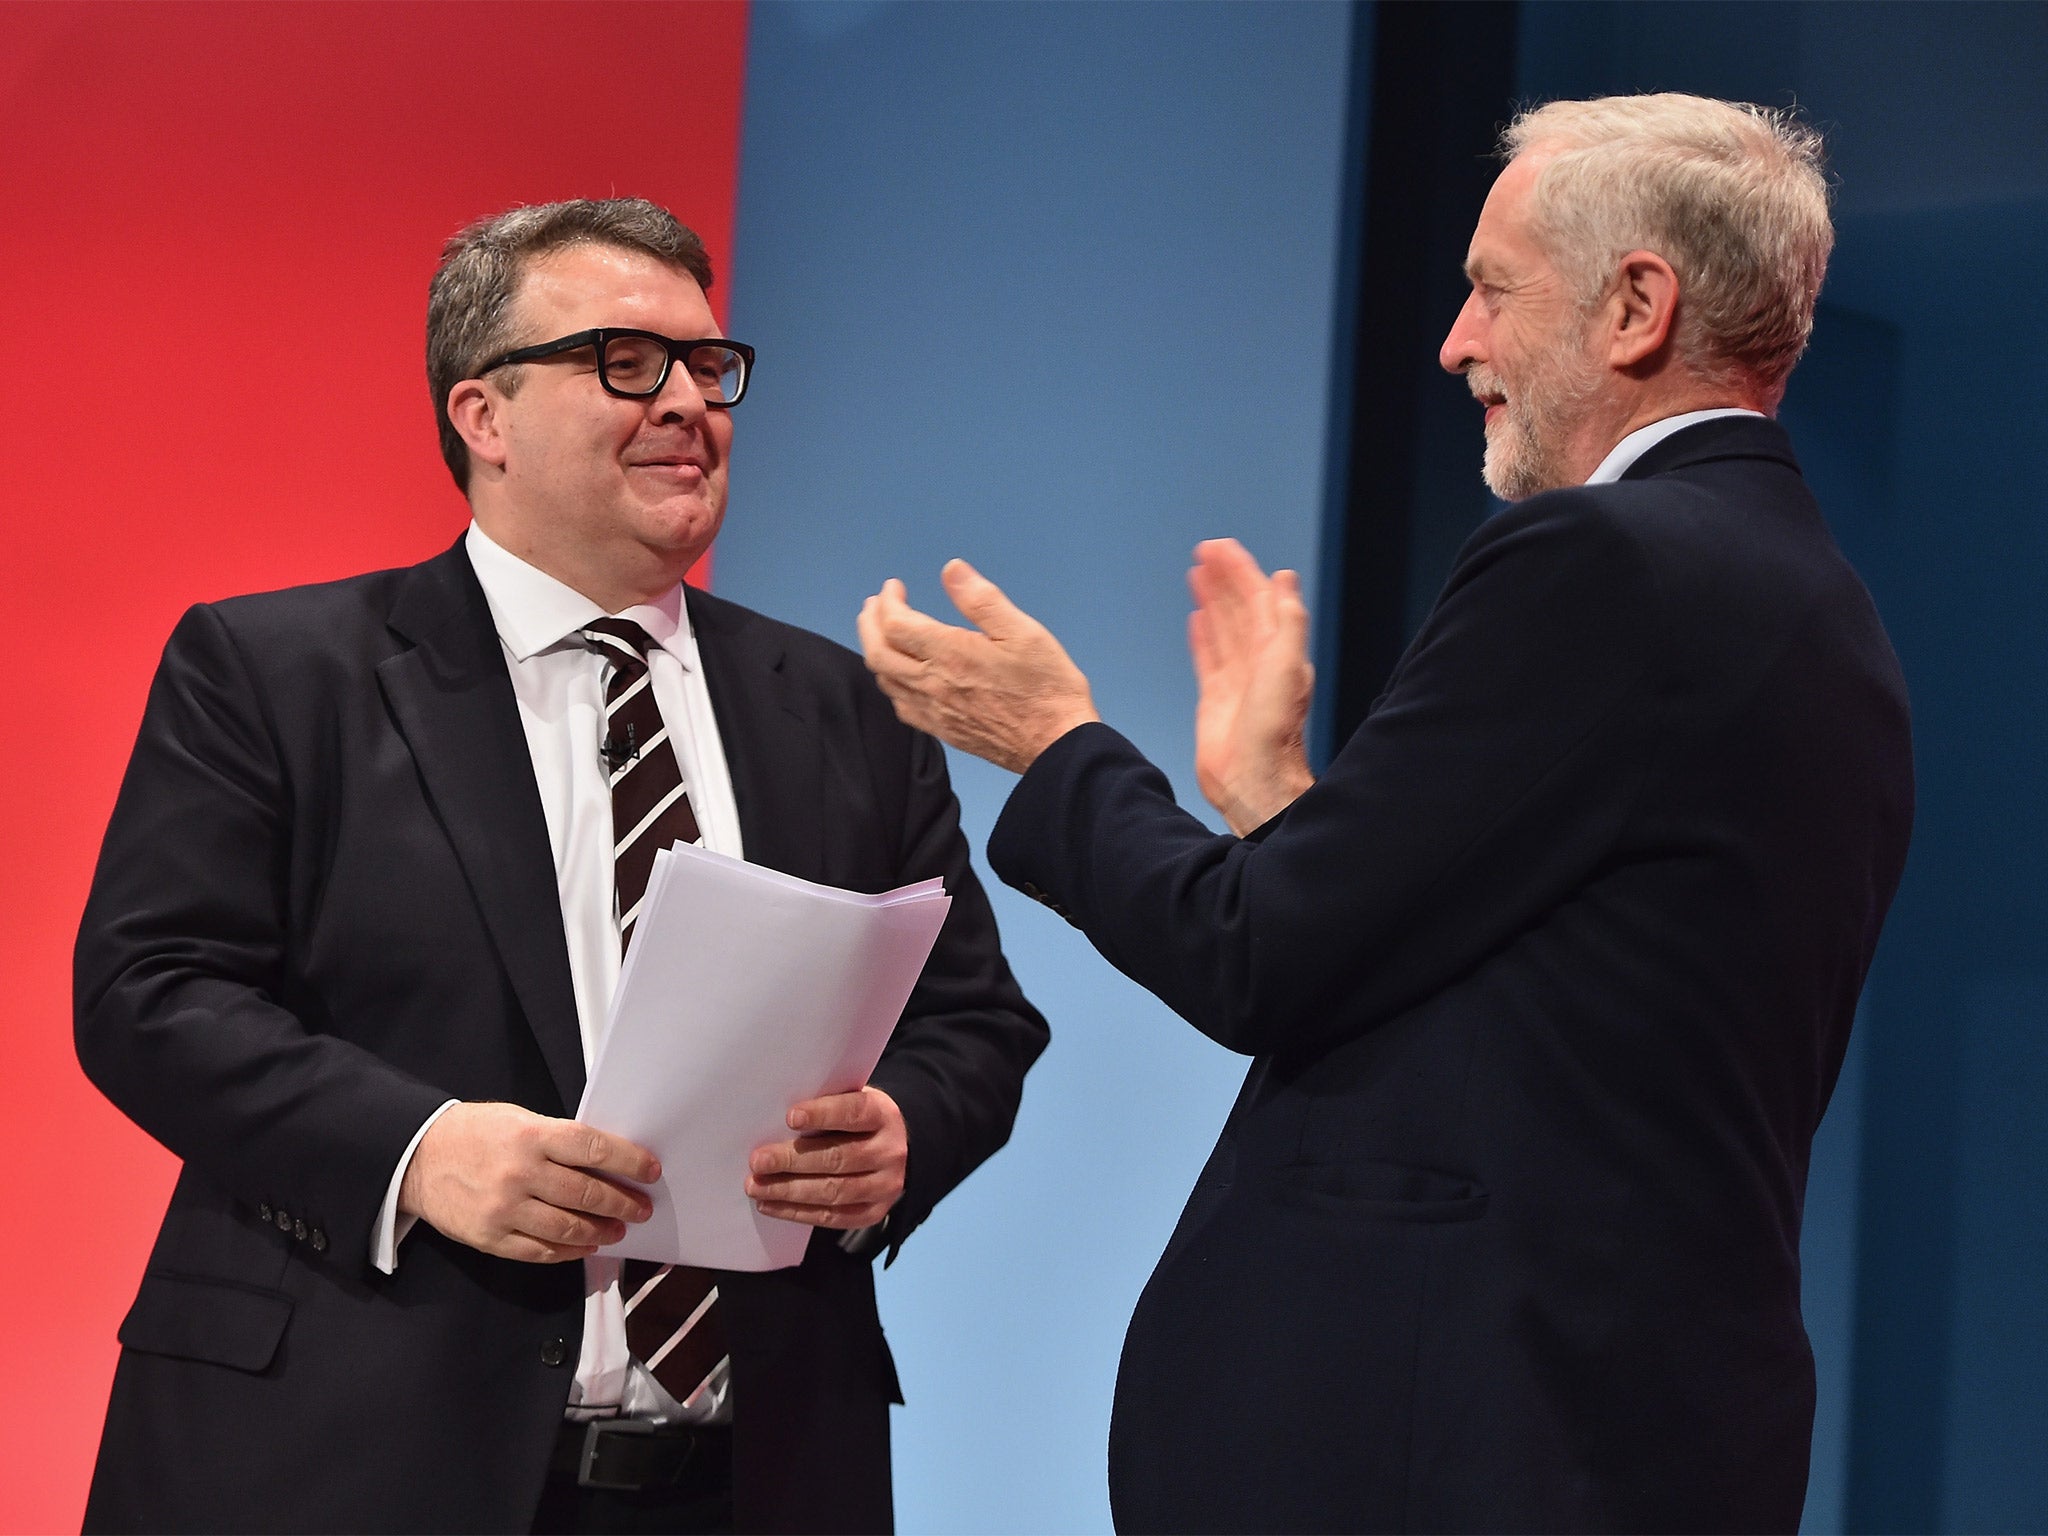 Deputy Leader of the Labour party Tom Watson recieves applause from Jeremy Corbyn following his closing speech